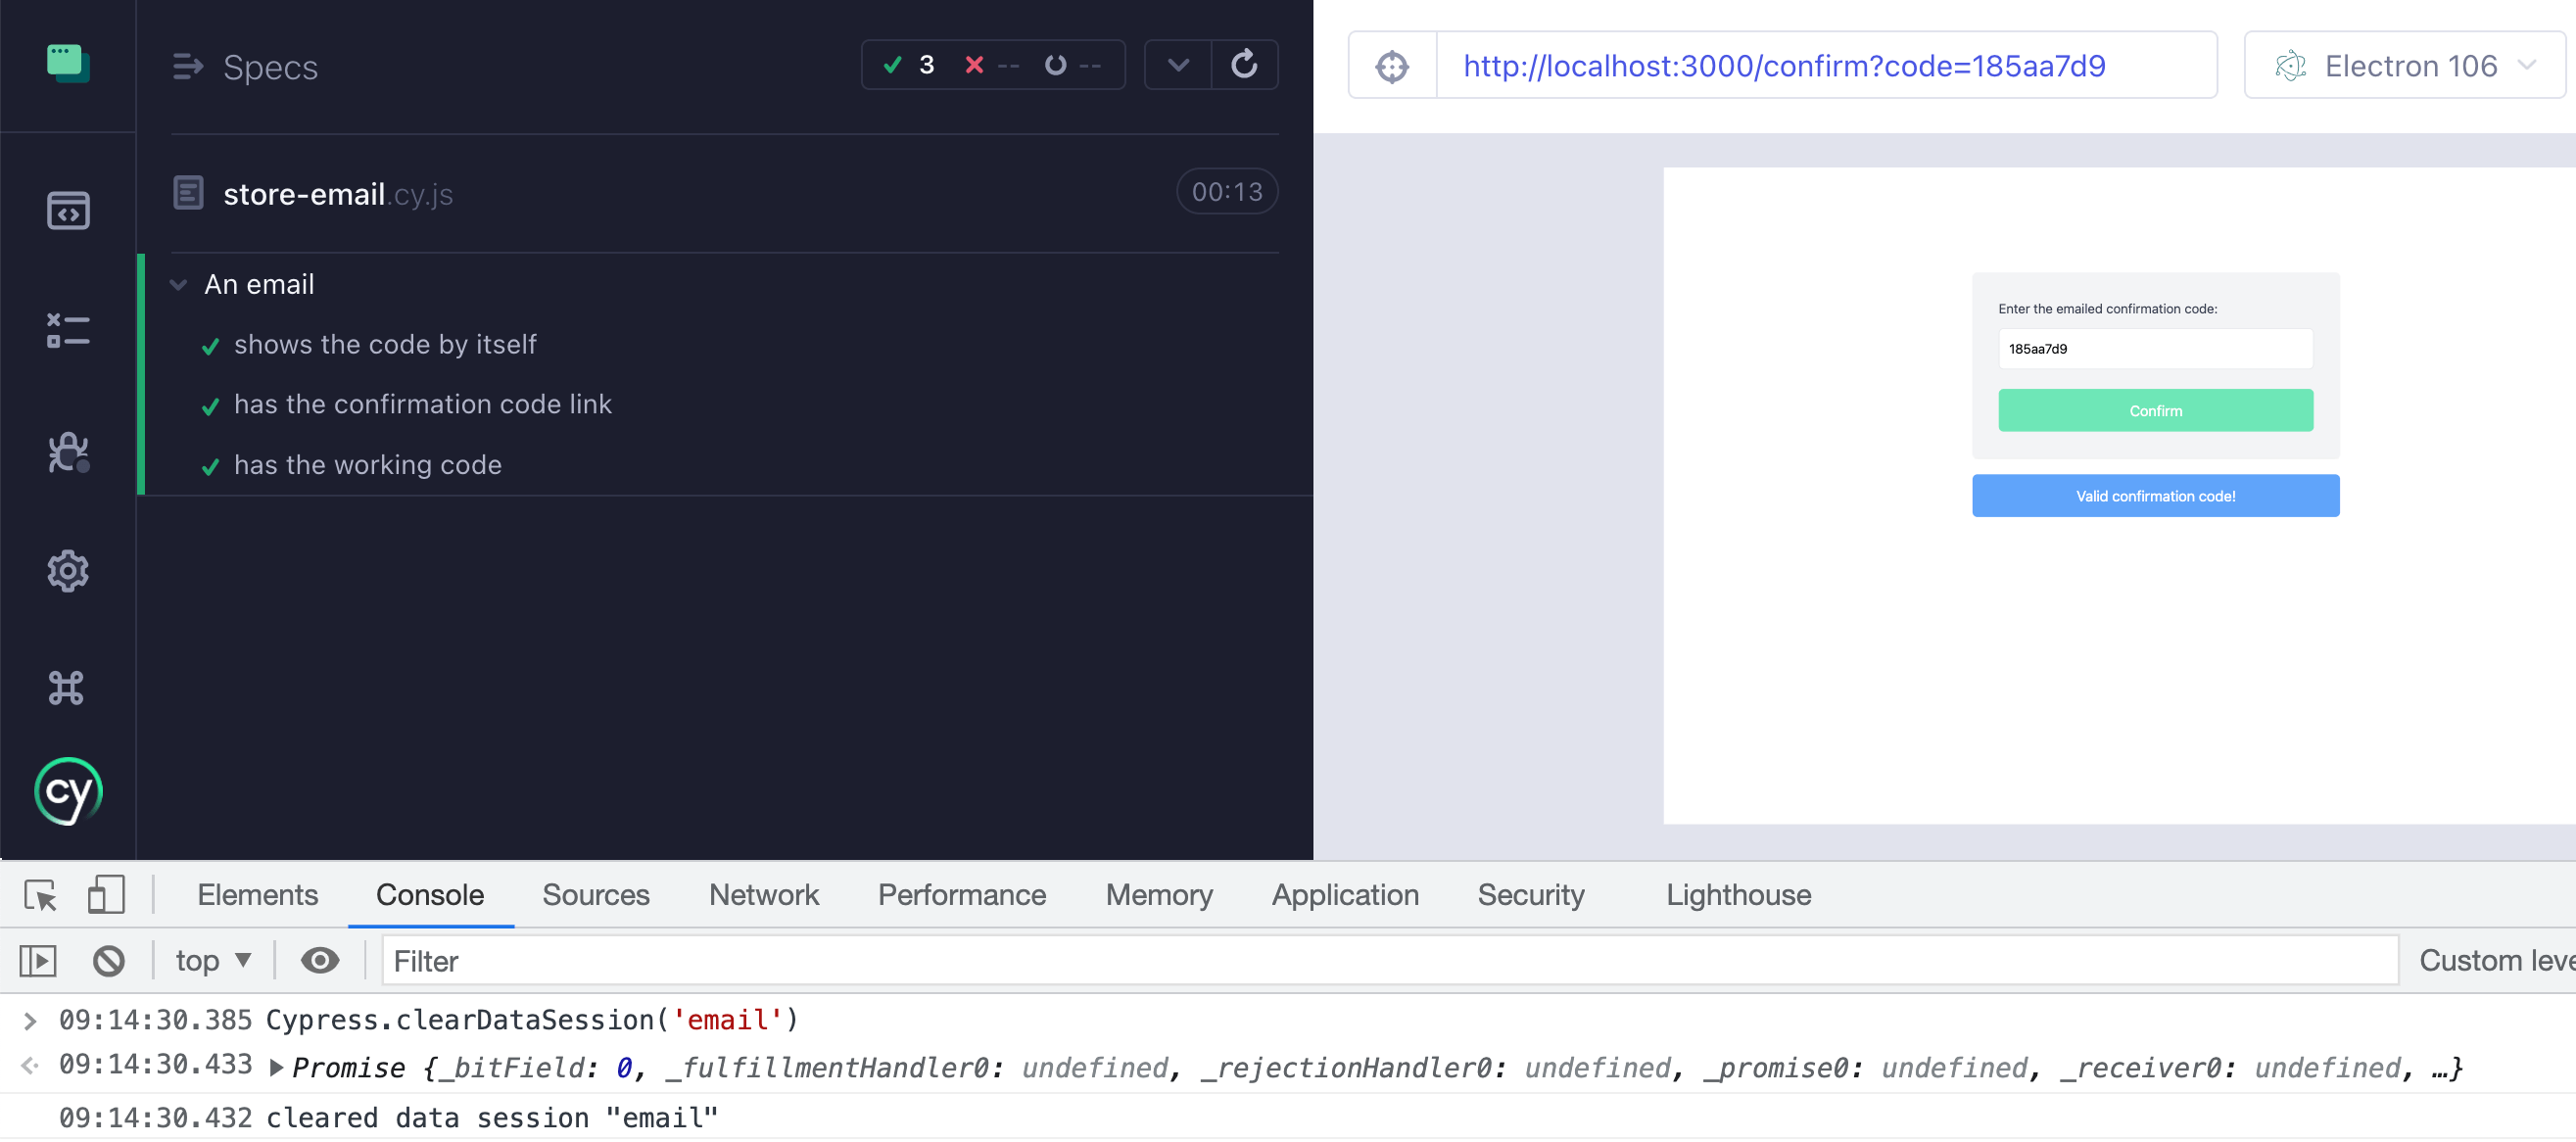 Have to call the plugin command via DevTools console